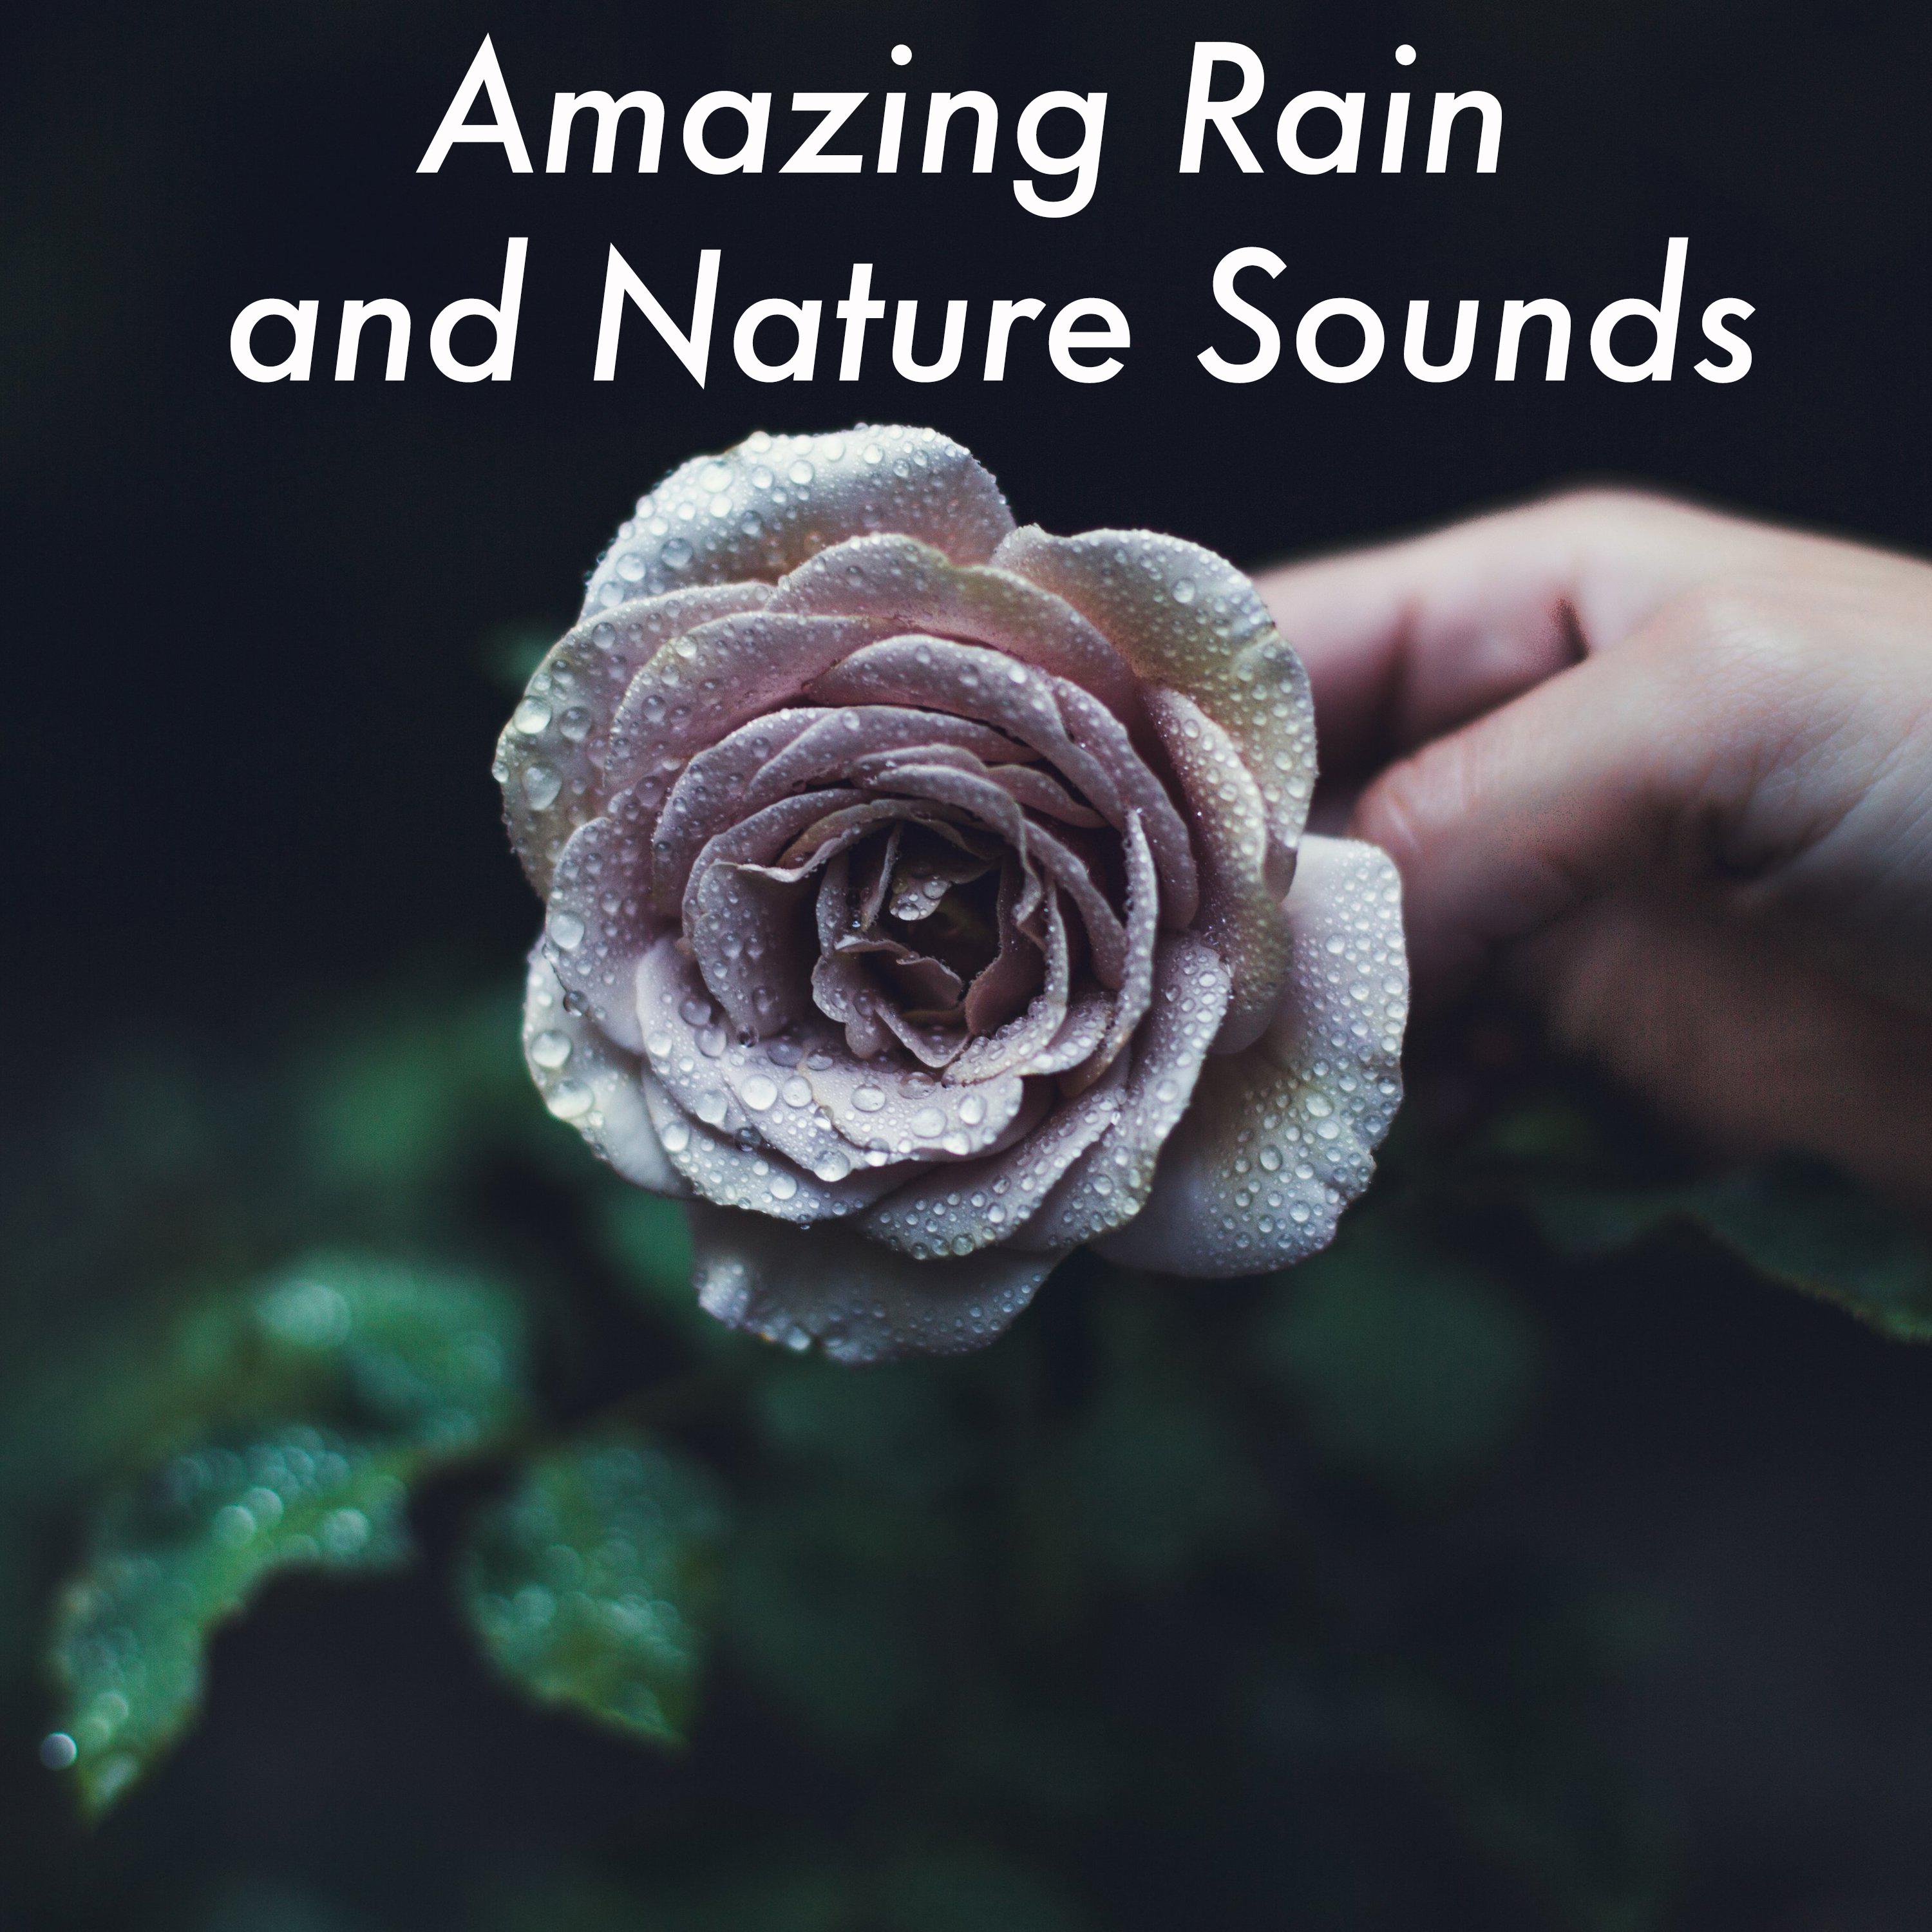 23 Amazing Rain and Nature Sounds. Ambient Rainfall for Sleep Meditation and Relaxing